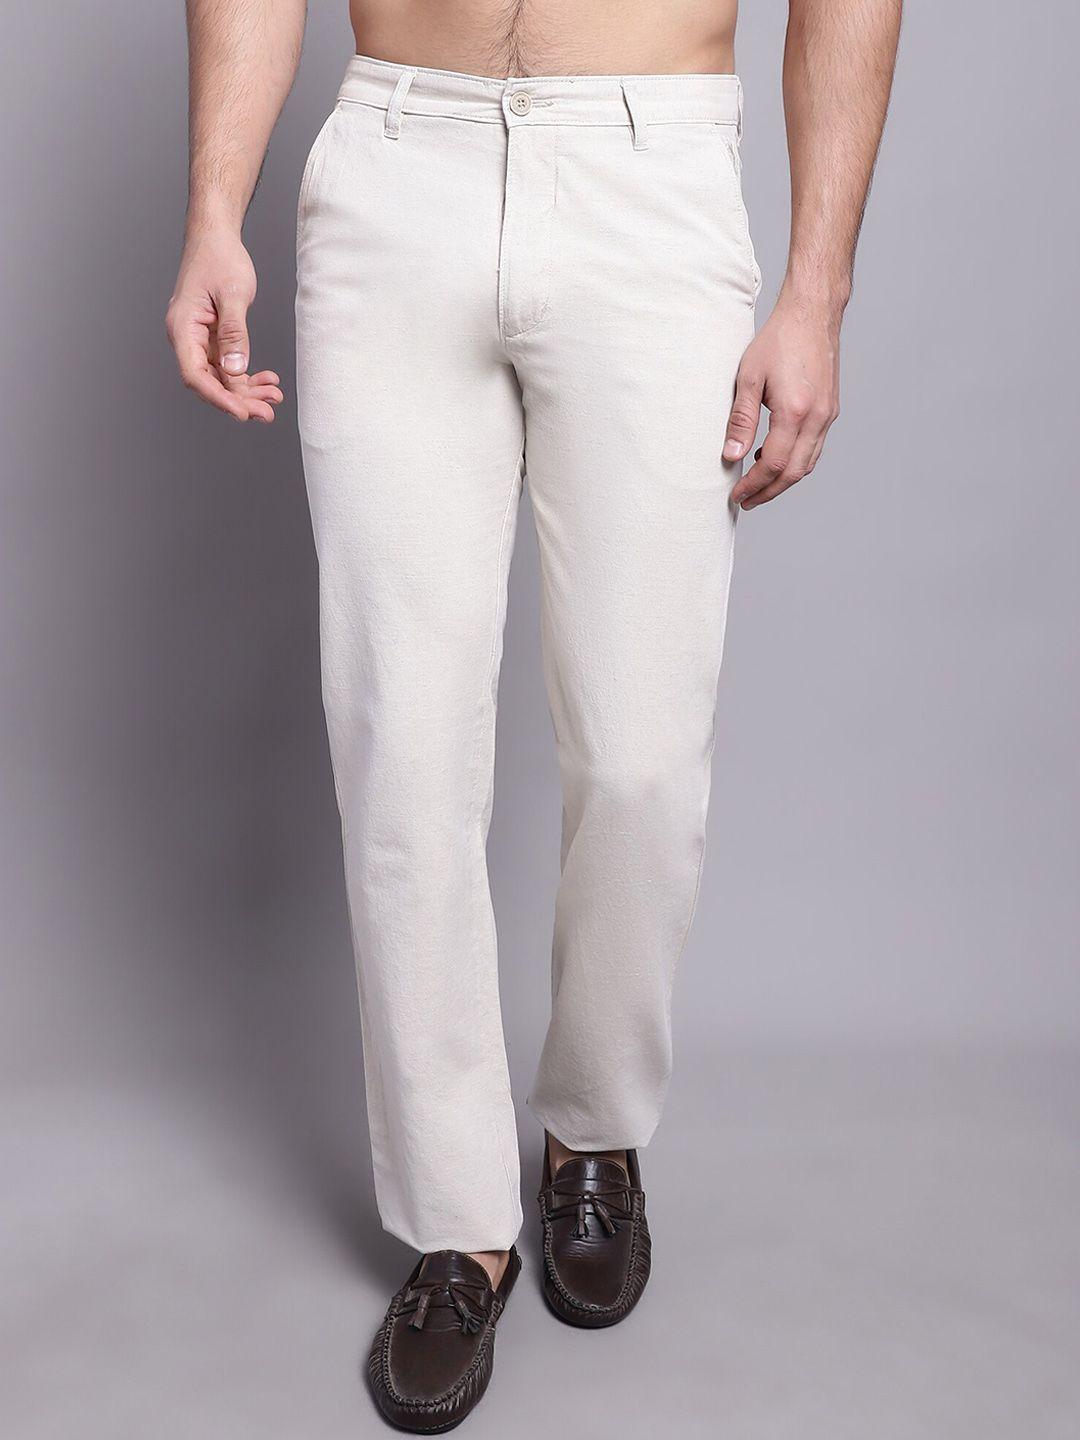 cantabil men cream-coloured comfort chinos trousers